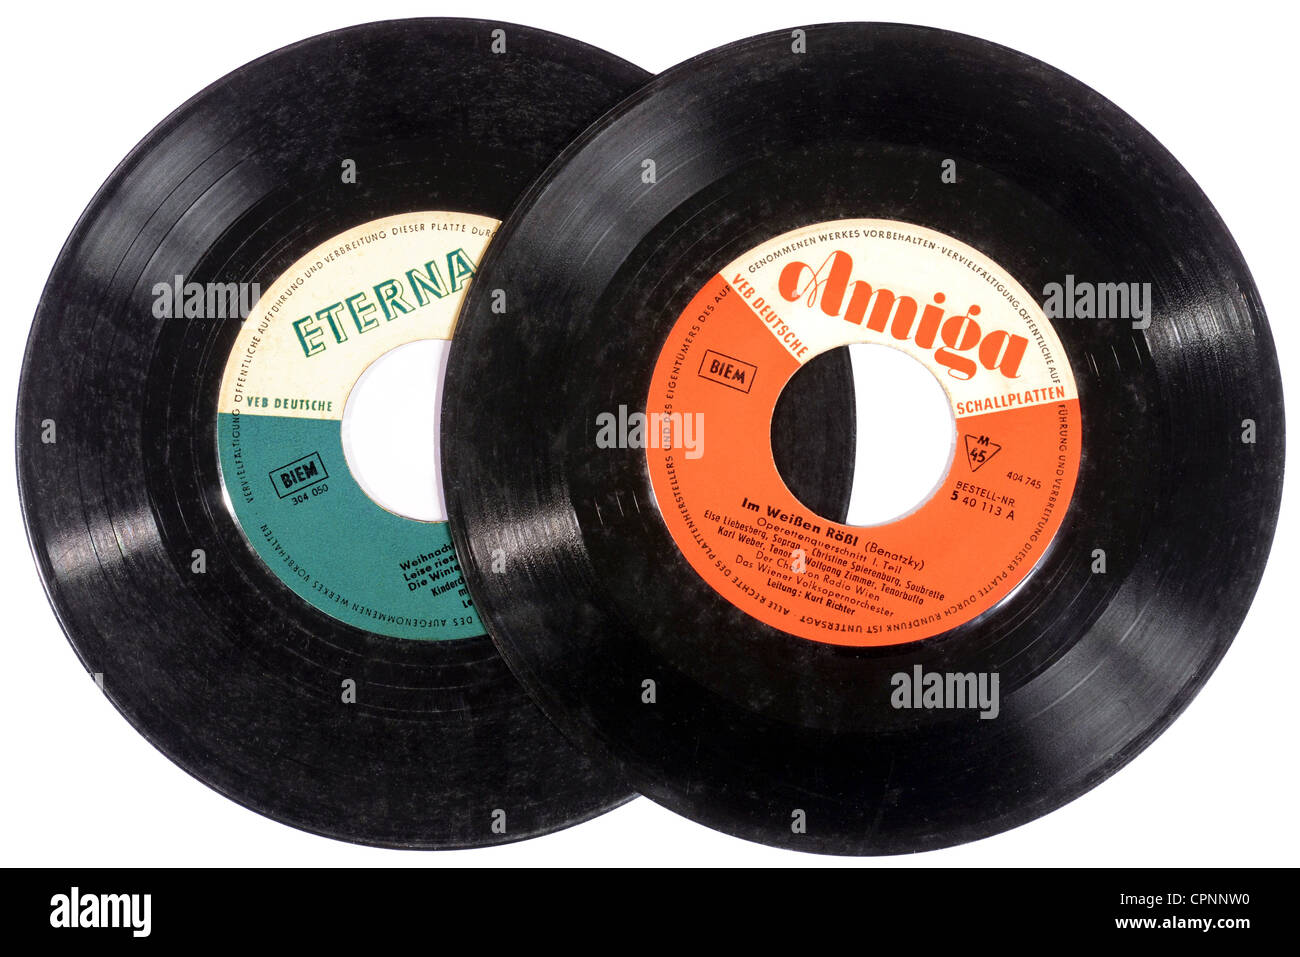 music, two records, record label Eterna, VEB Deutsche Schallplatten, Amiga, 'Im Weissen Roessl', single, vinyl, slightly damaged, East-Germany, circa 1960, Additional-Rights-Clearences-Not Available Stock Photo